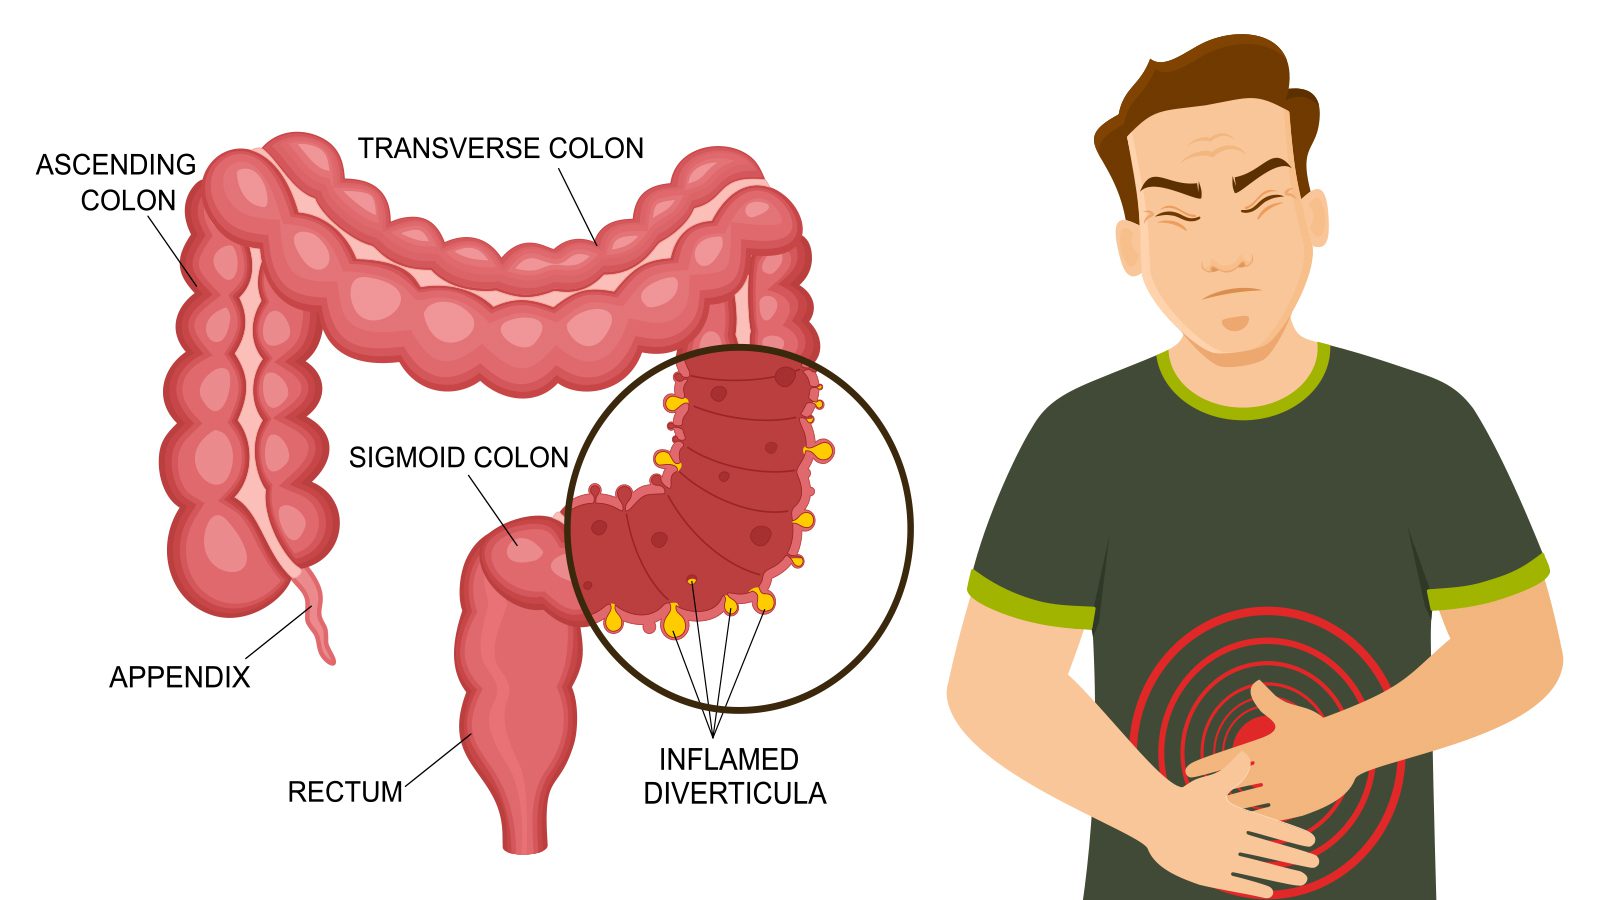 10 Signs of Diverticulitis (and What To Do)